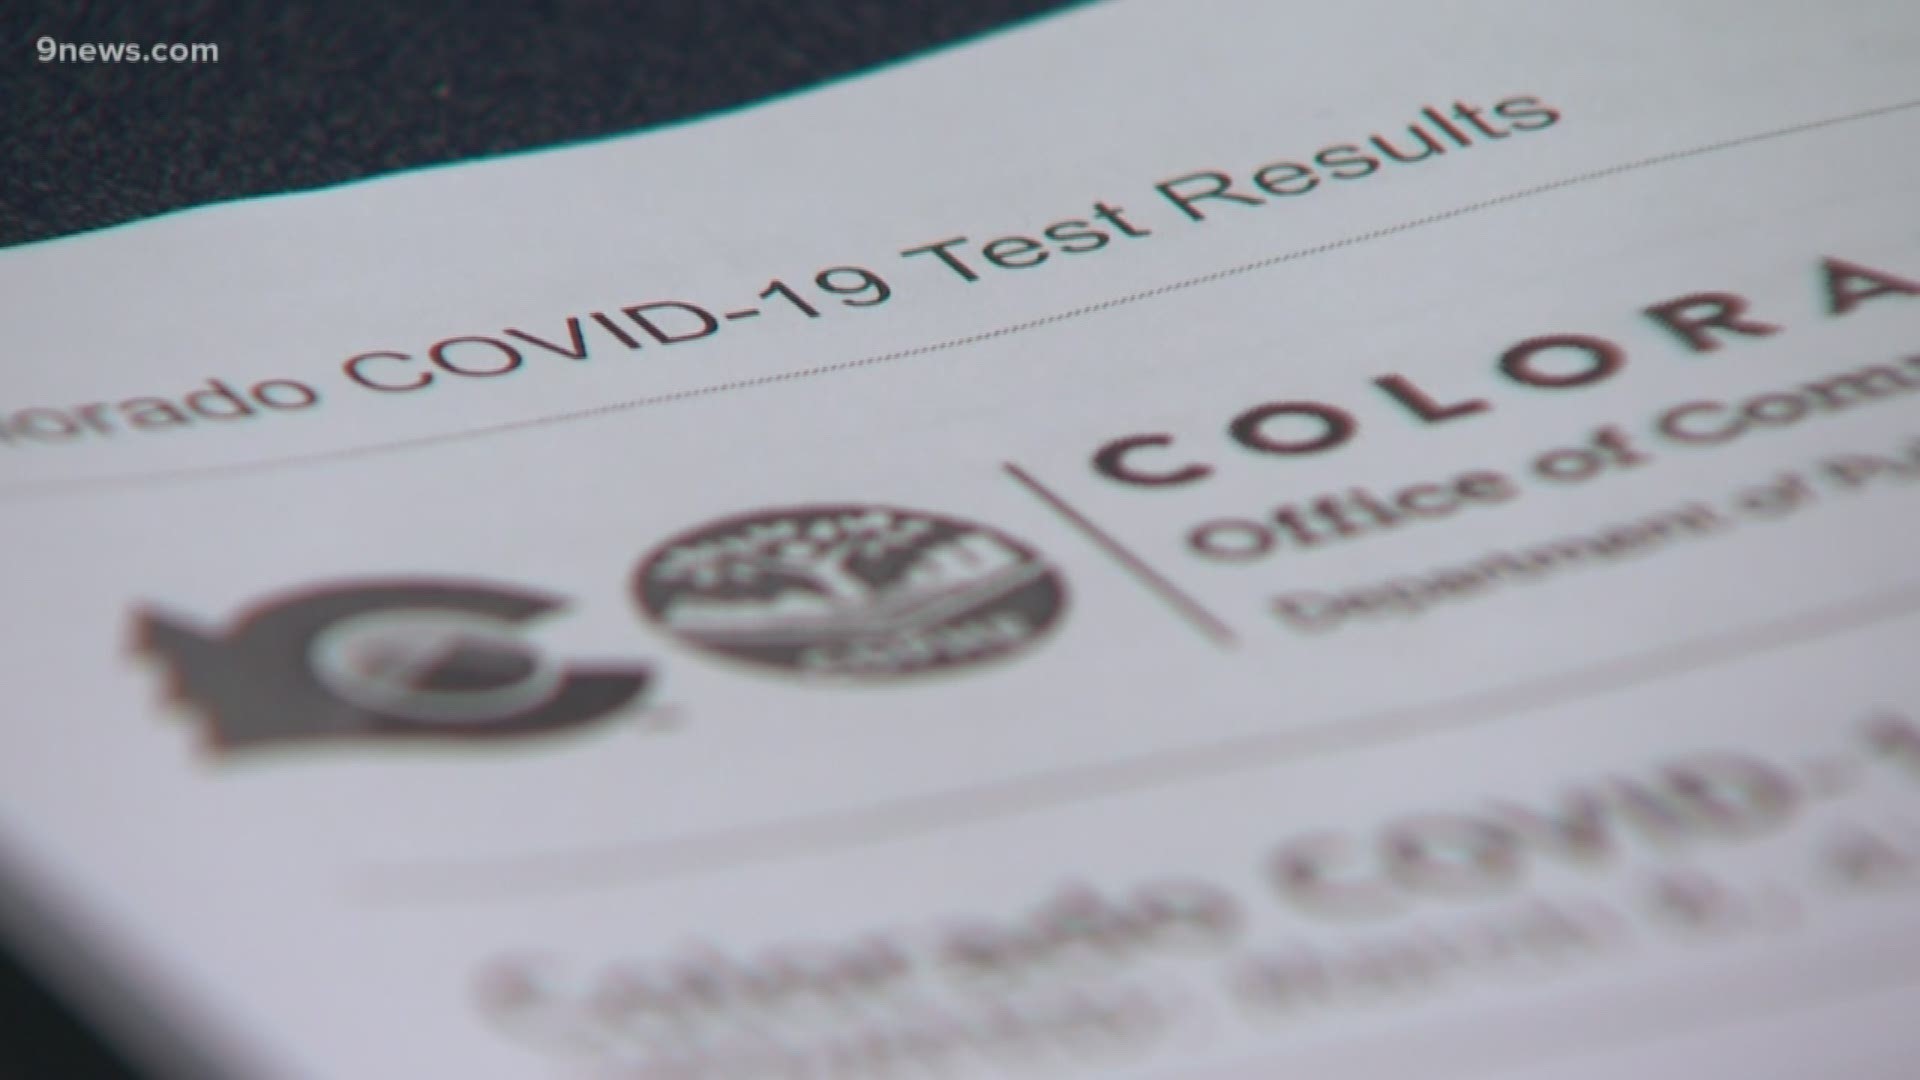 The state says they can do up to 160 tests a day, though they haven't, saying they don't want to strain resources.